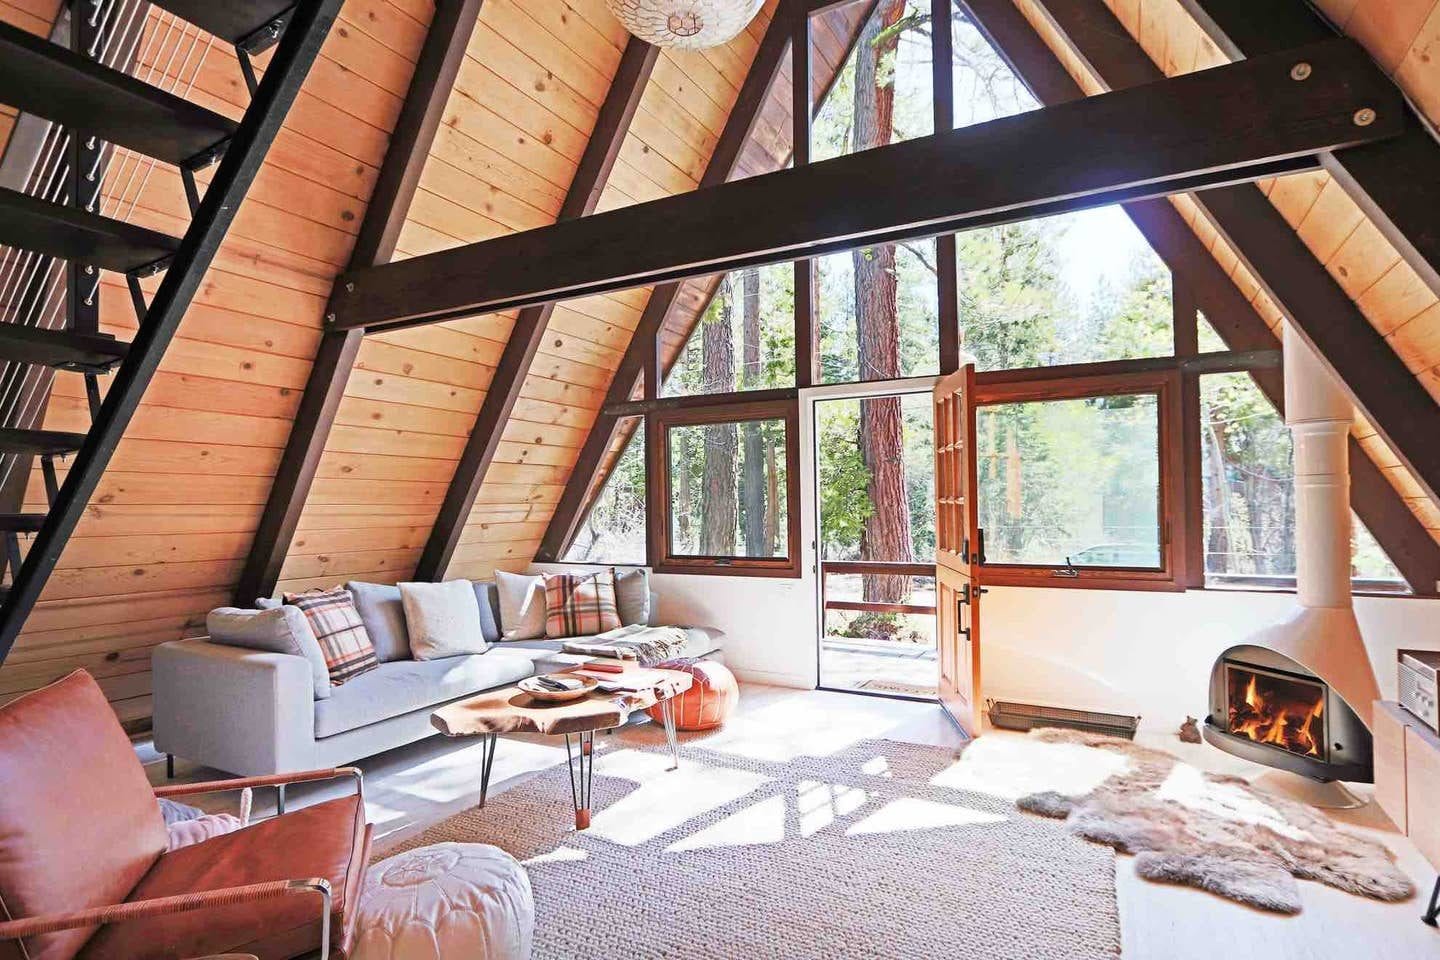 Milgard Windows by popular San Francisco life and style blog, Just Add Glam: image of a A-Frame cabin with Milgard windows. 